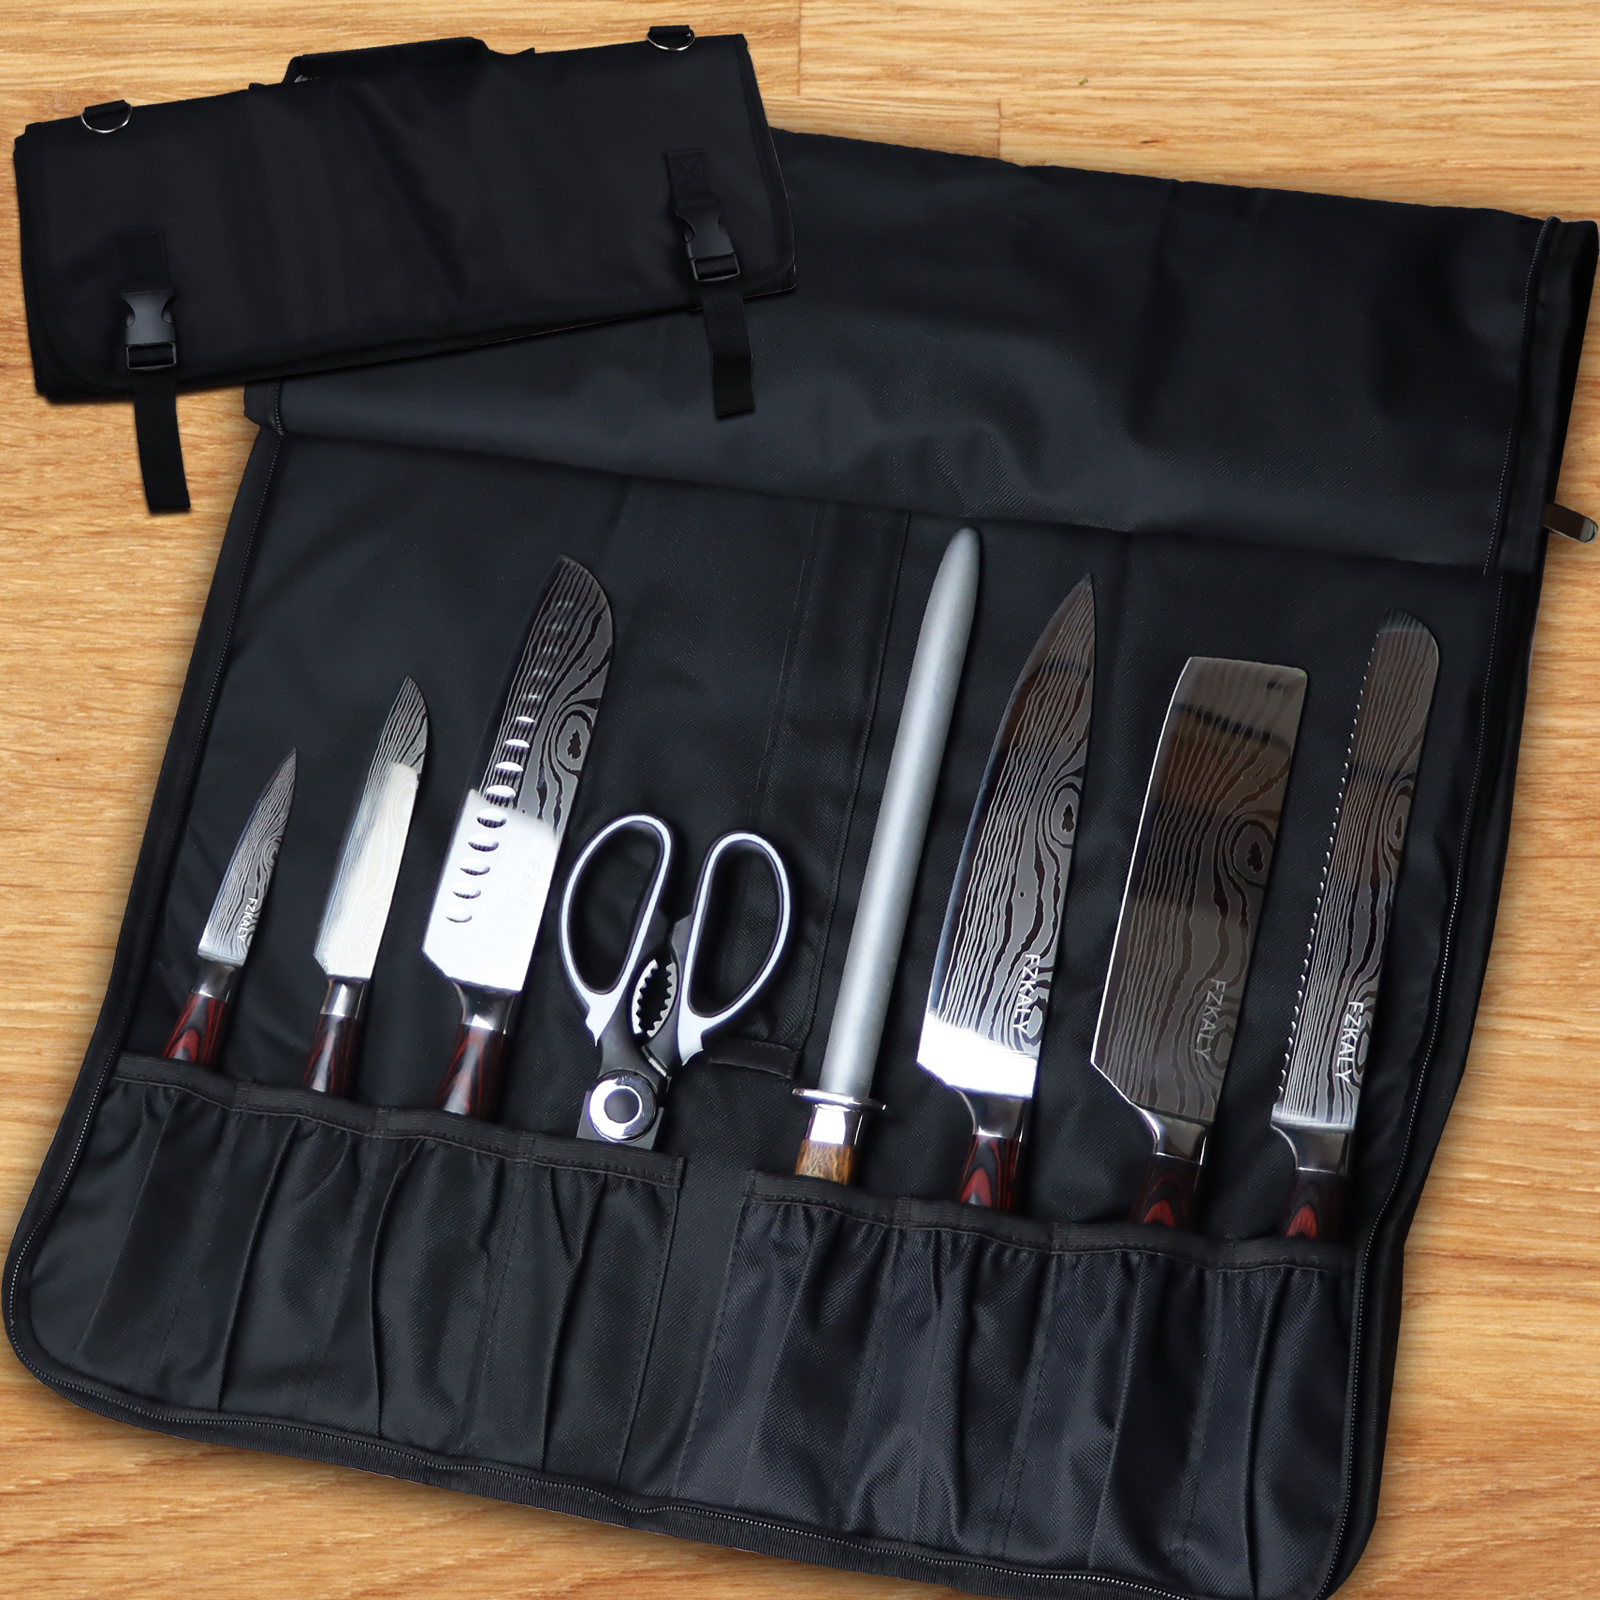 8-Piece Kitchen Knife Set with Knife Sharpener Rod Stainless Steel